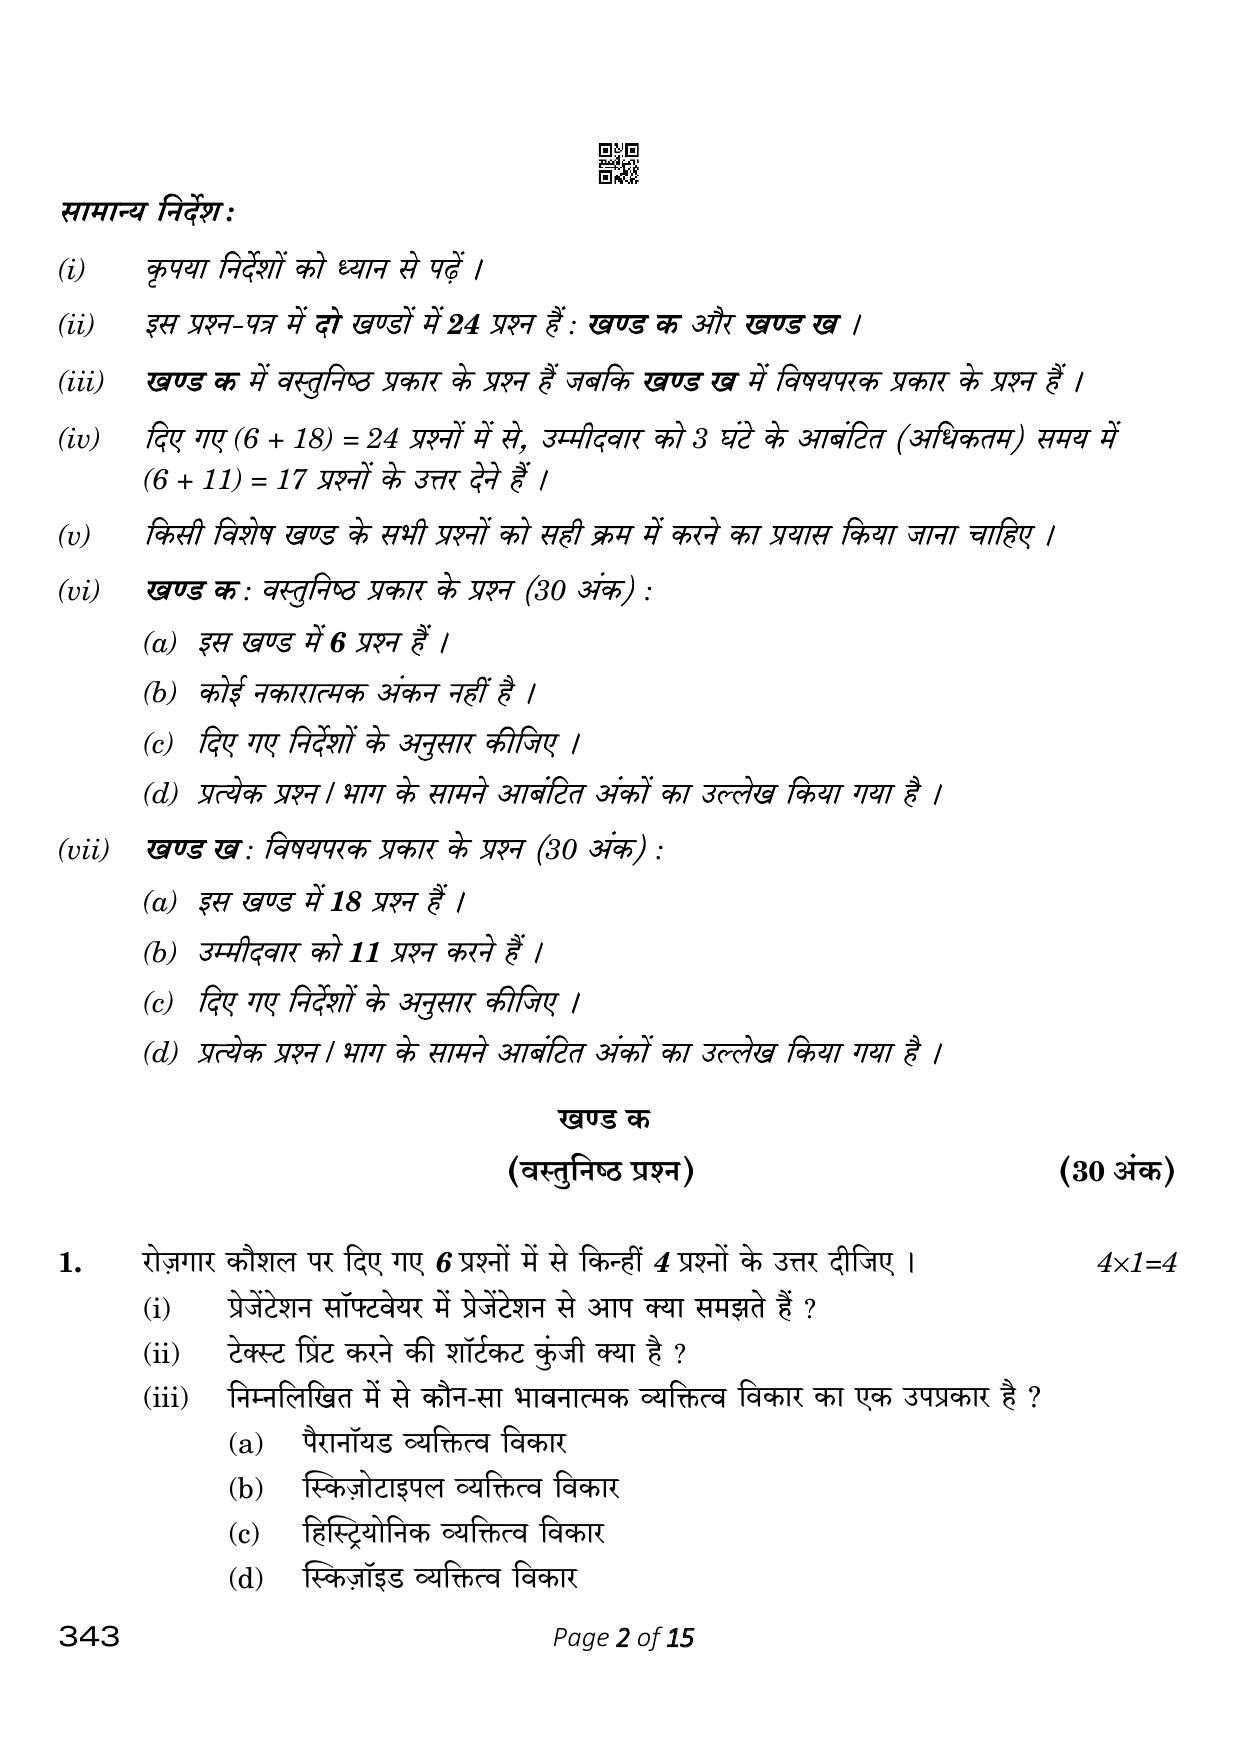 CBSE Class 12 343_Electrical Technology 2023 Question Paper - Page 2